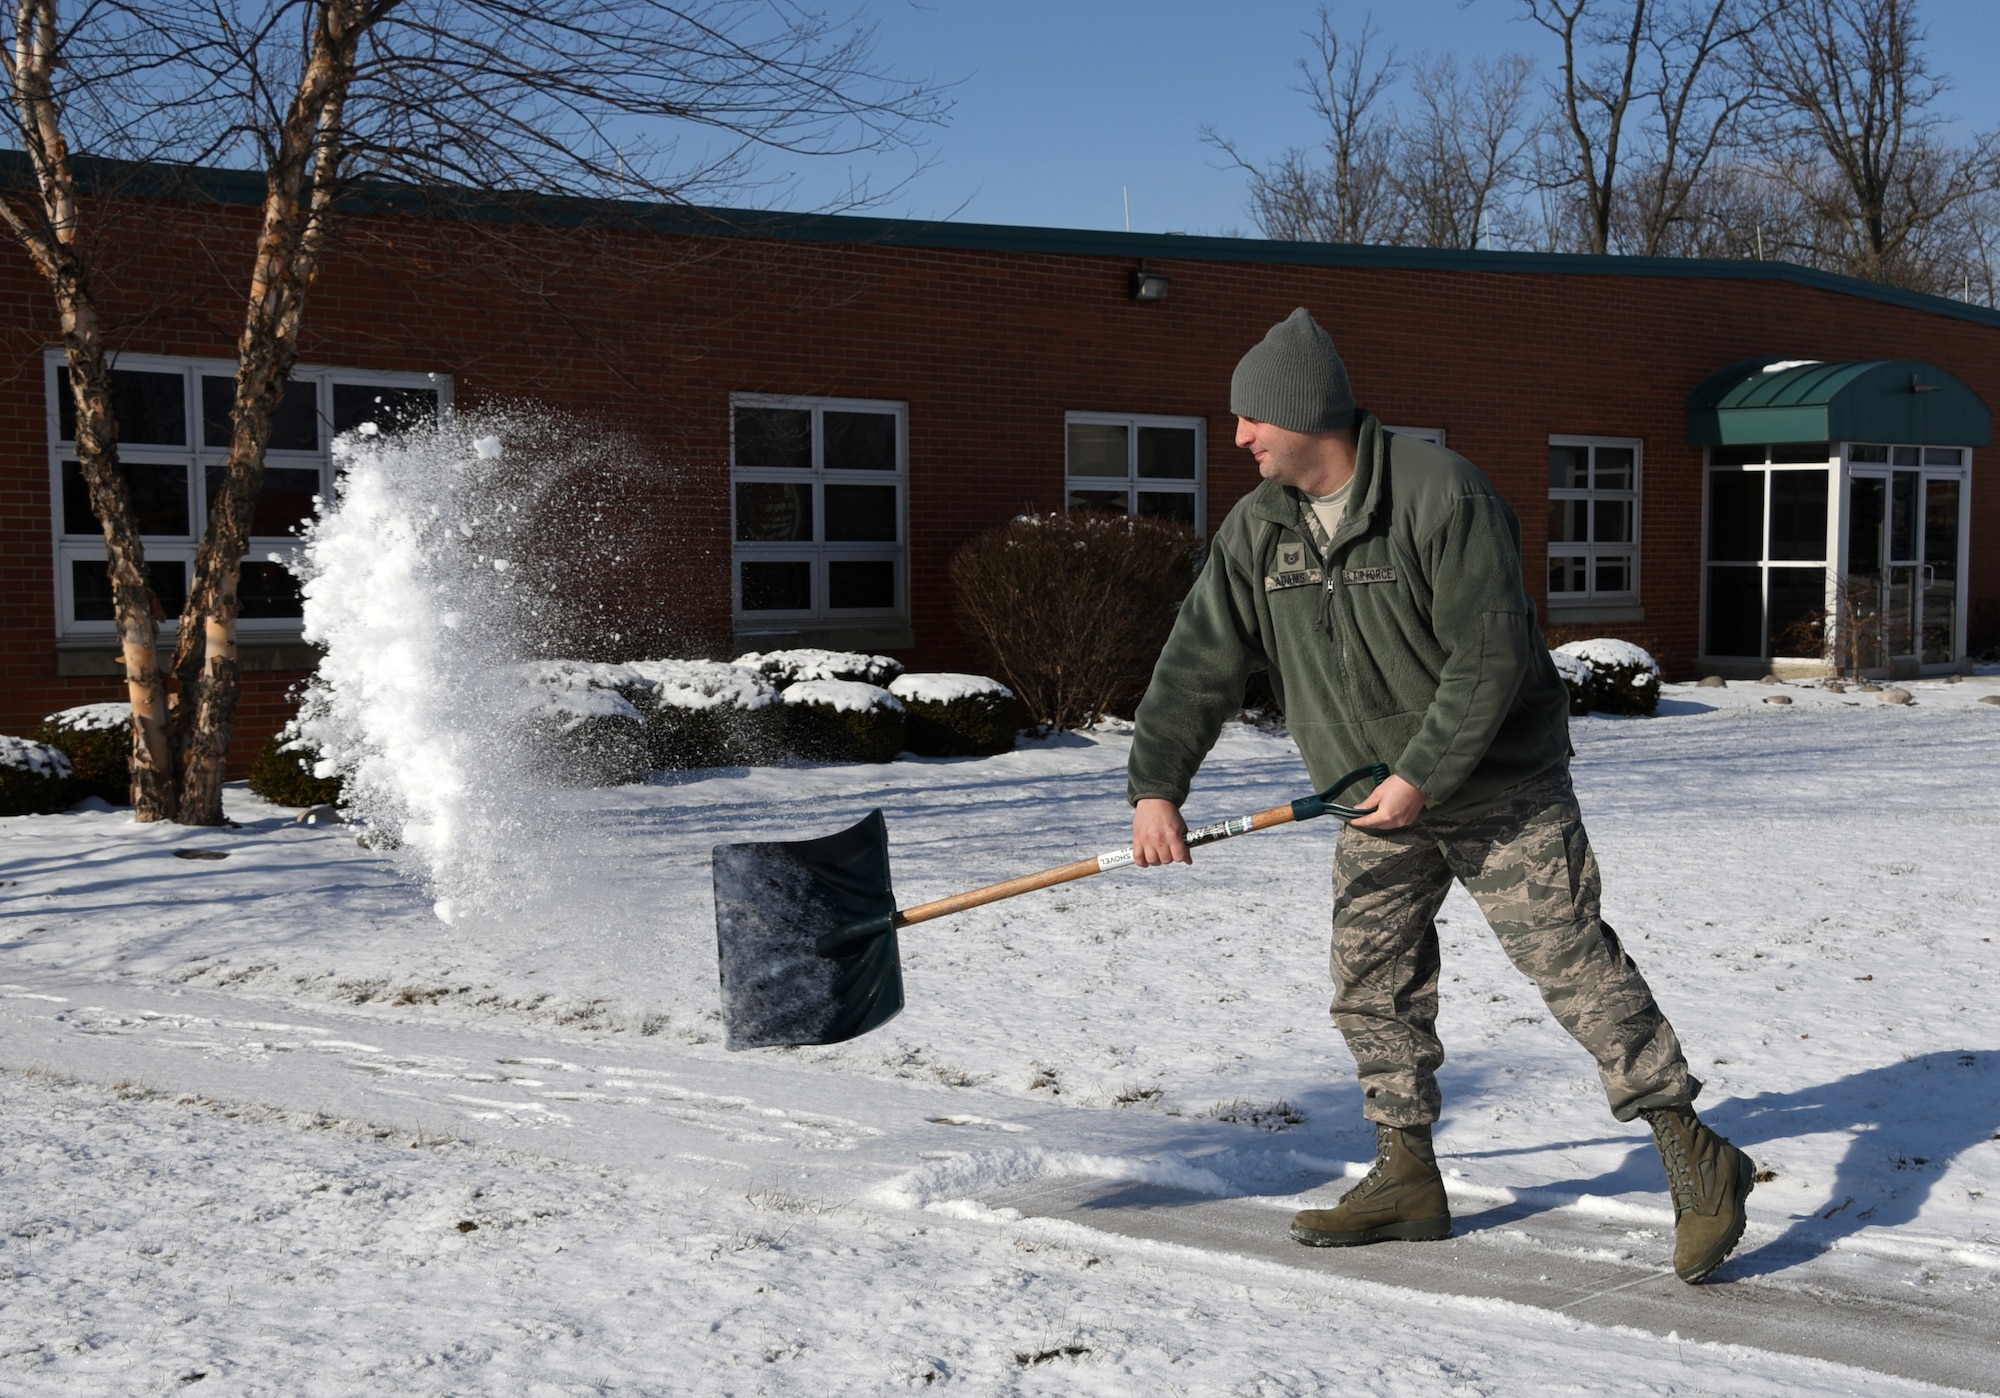 Tech. Sgt. Ray Adams, the occupational safety NCO of the 178th Wing, clears a sidewalk at the Springfield Air National Guard Base, Ohio Jan 7, 2017. The base safety office offers tips to help Airmen stay safe during inclement winter weather. (U.S. Air National Guard photo by Airman 1st Class Anthony Le)